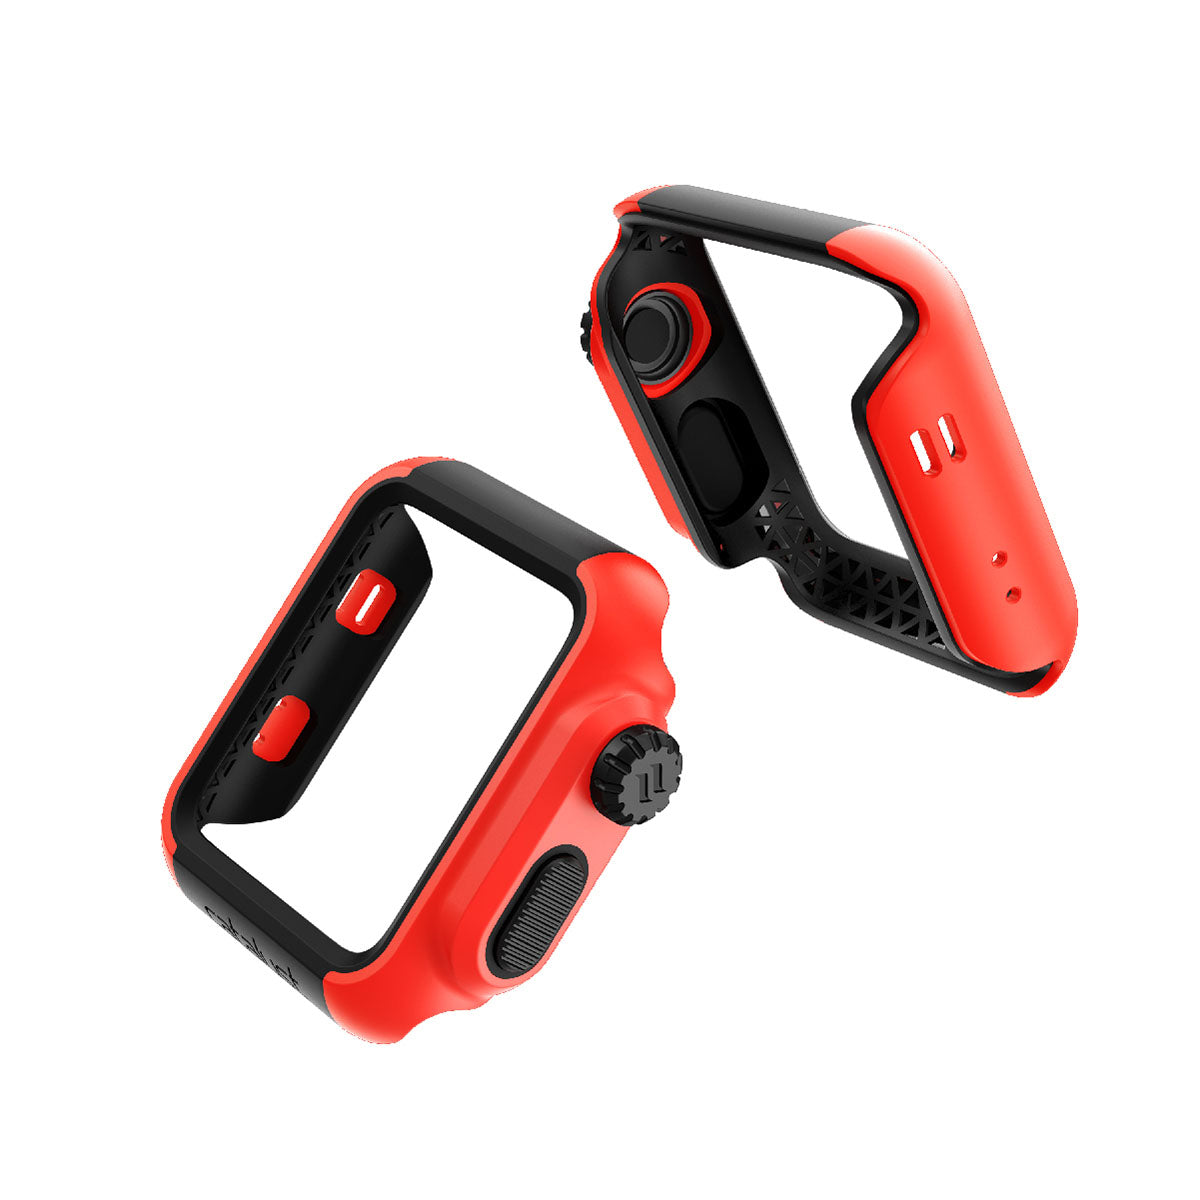 catalyst apple watch series 3 2 42mm impact protection case views of all the sides of the impact protection case sunset